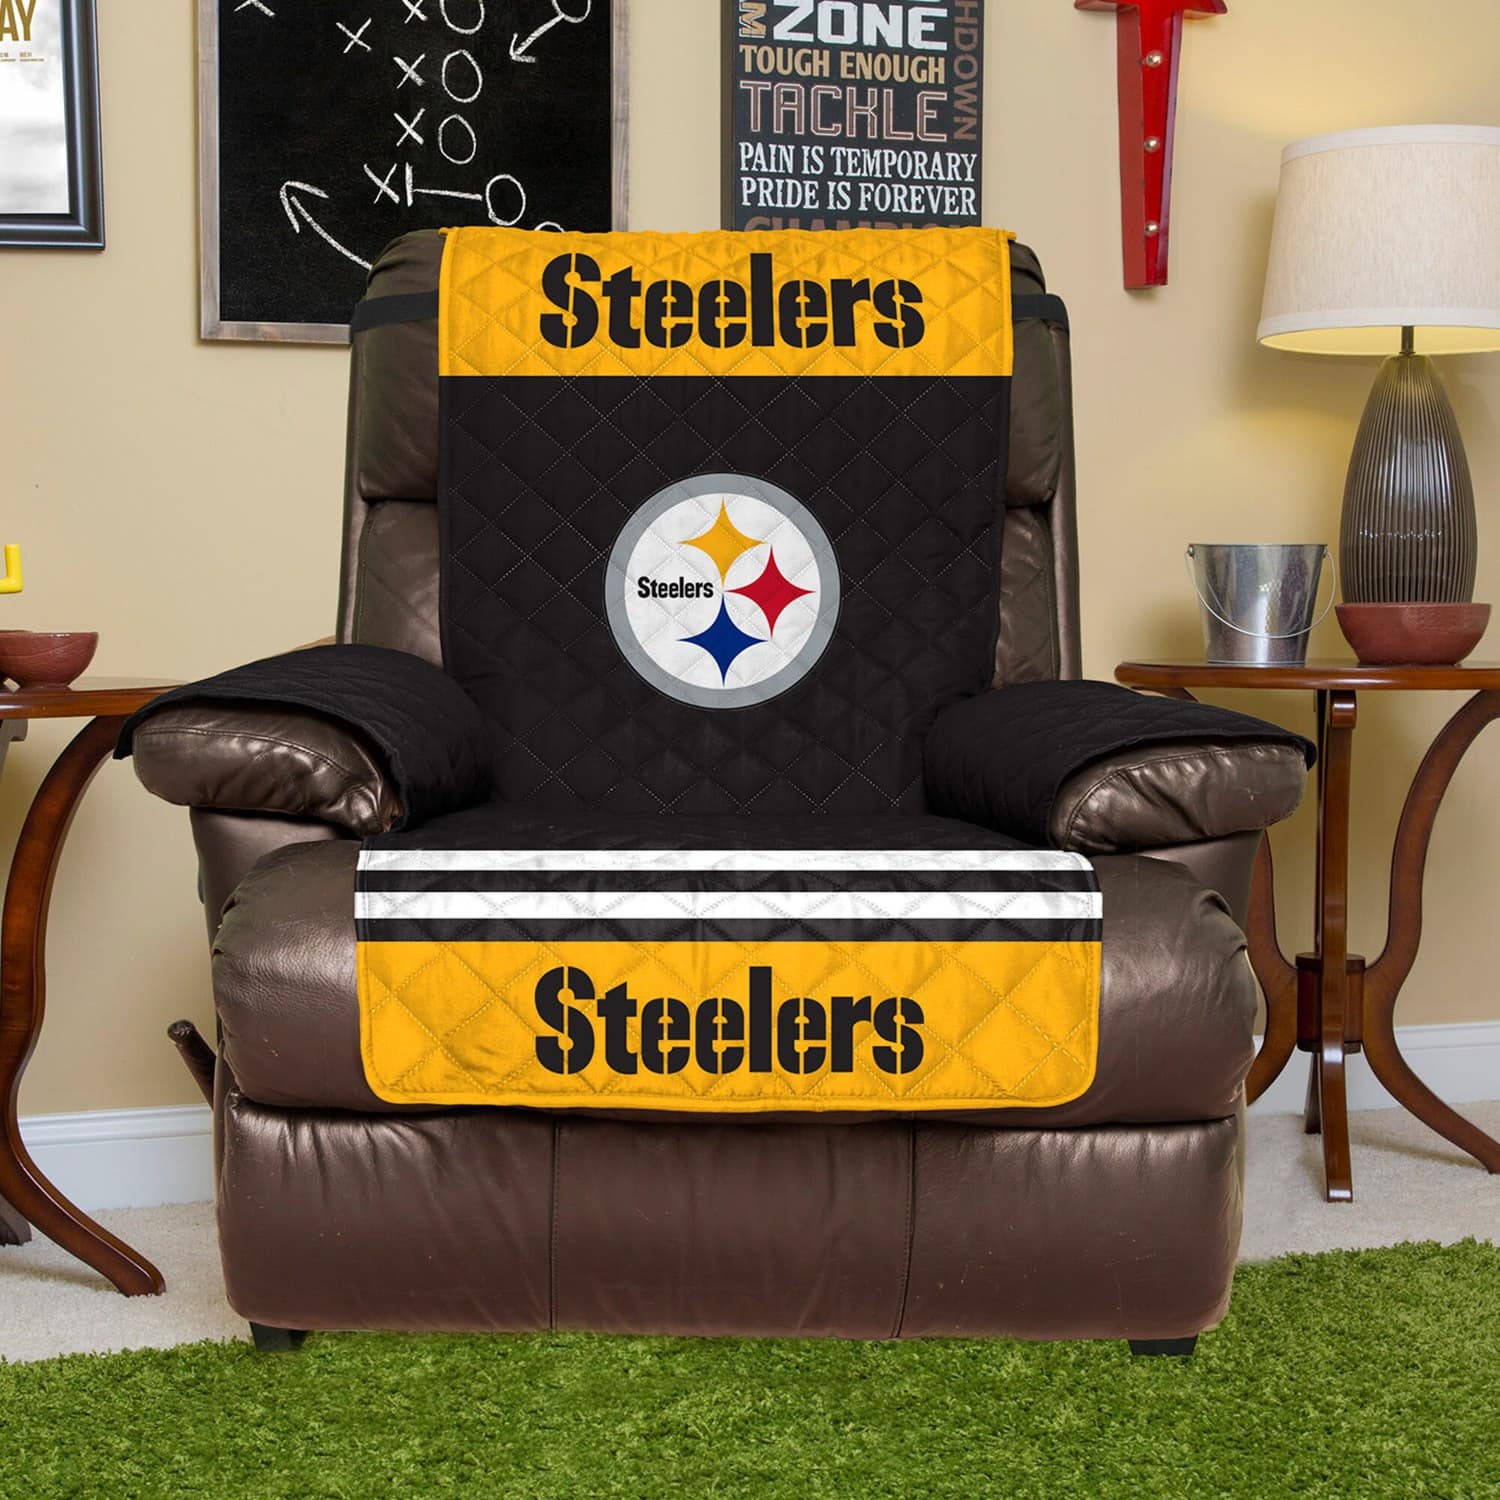 Steelers Lay-Z-Boy recliner cover with logo